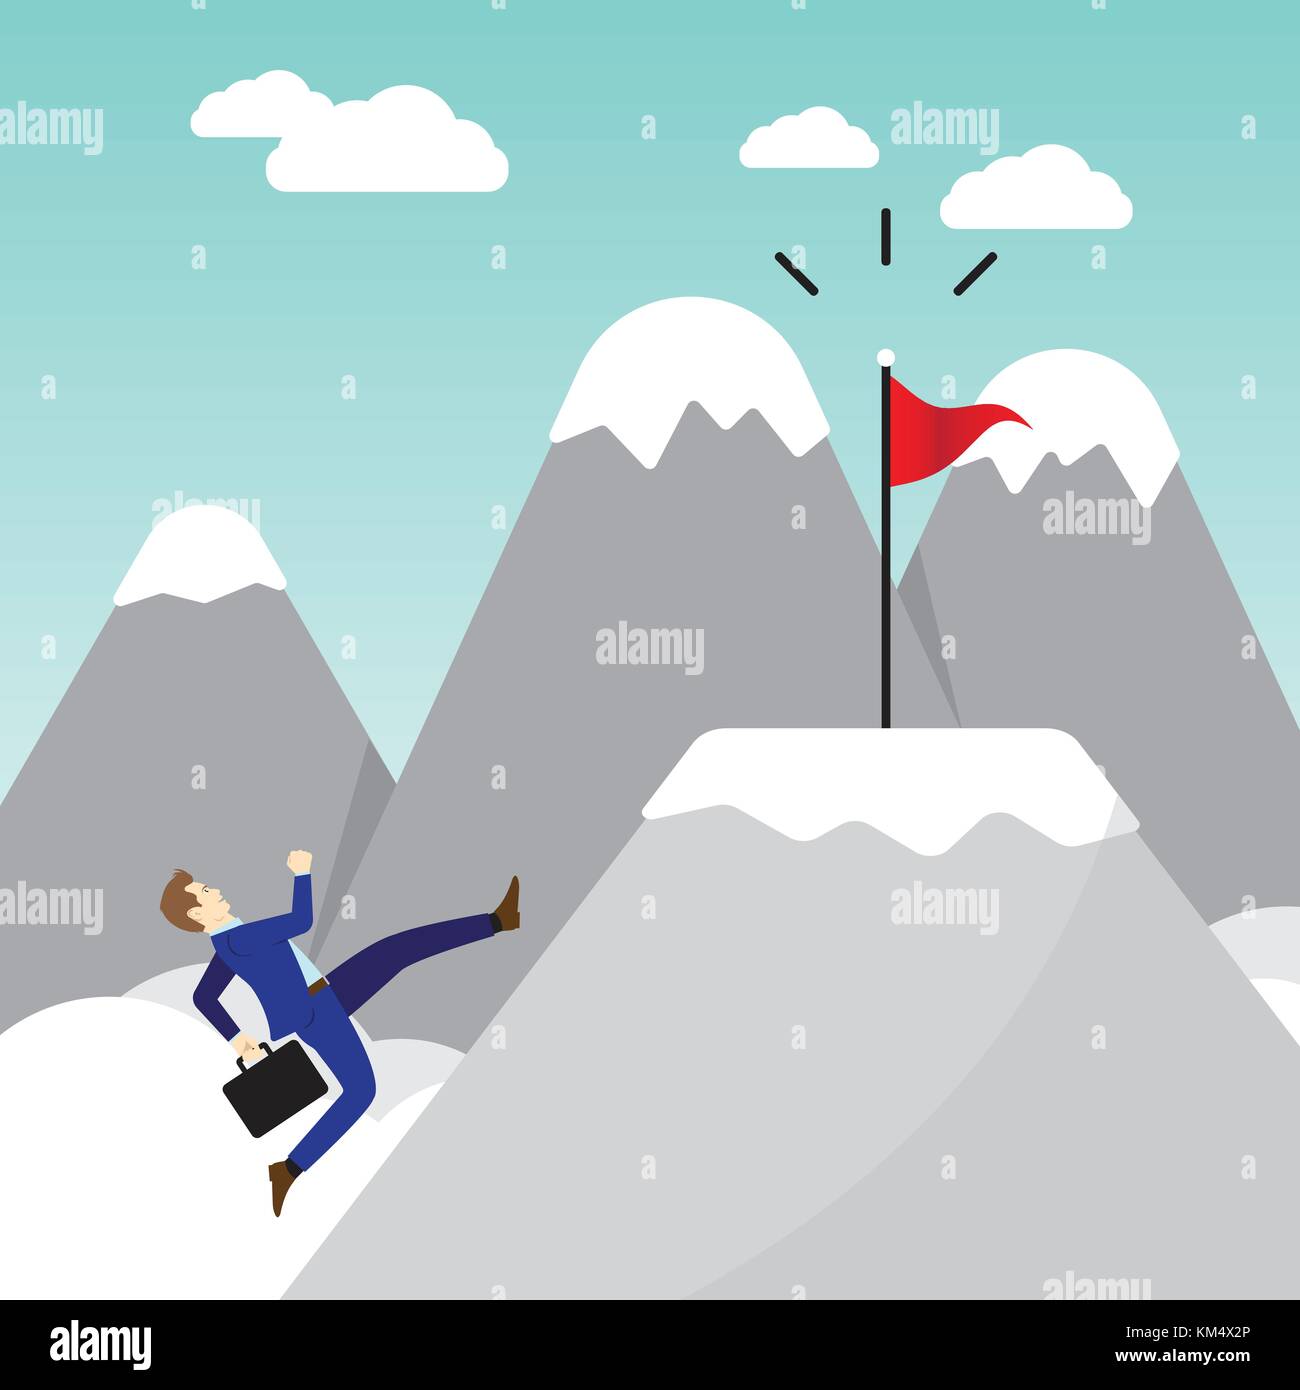 Business Concept As A Full-Energy Businessman Running On Mountain To The Red Flag. It Means Performing The Best Effort To Approach, Succeed The Goal. Stock Vector